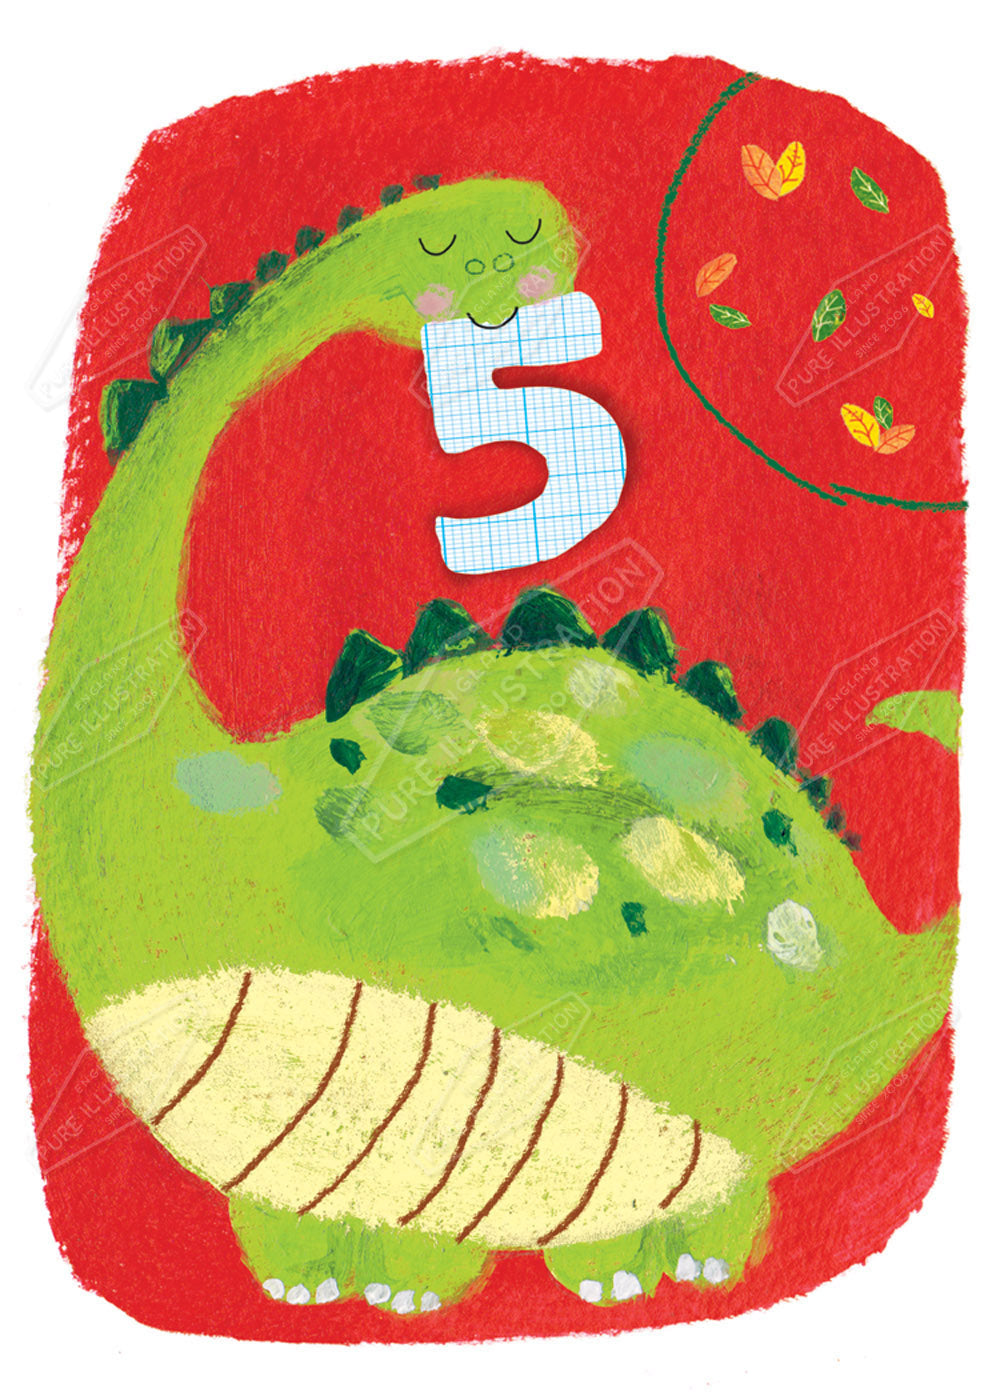 Birthday Dinosaur Age Card Greeting Card Design by Cory Reid for Pure art Licensing Agency & Surface Design Studio